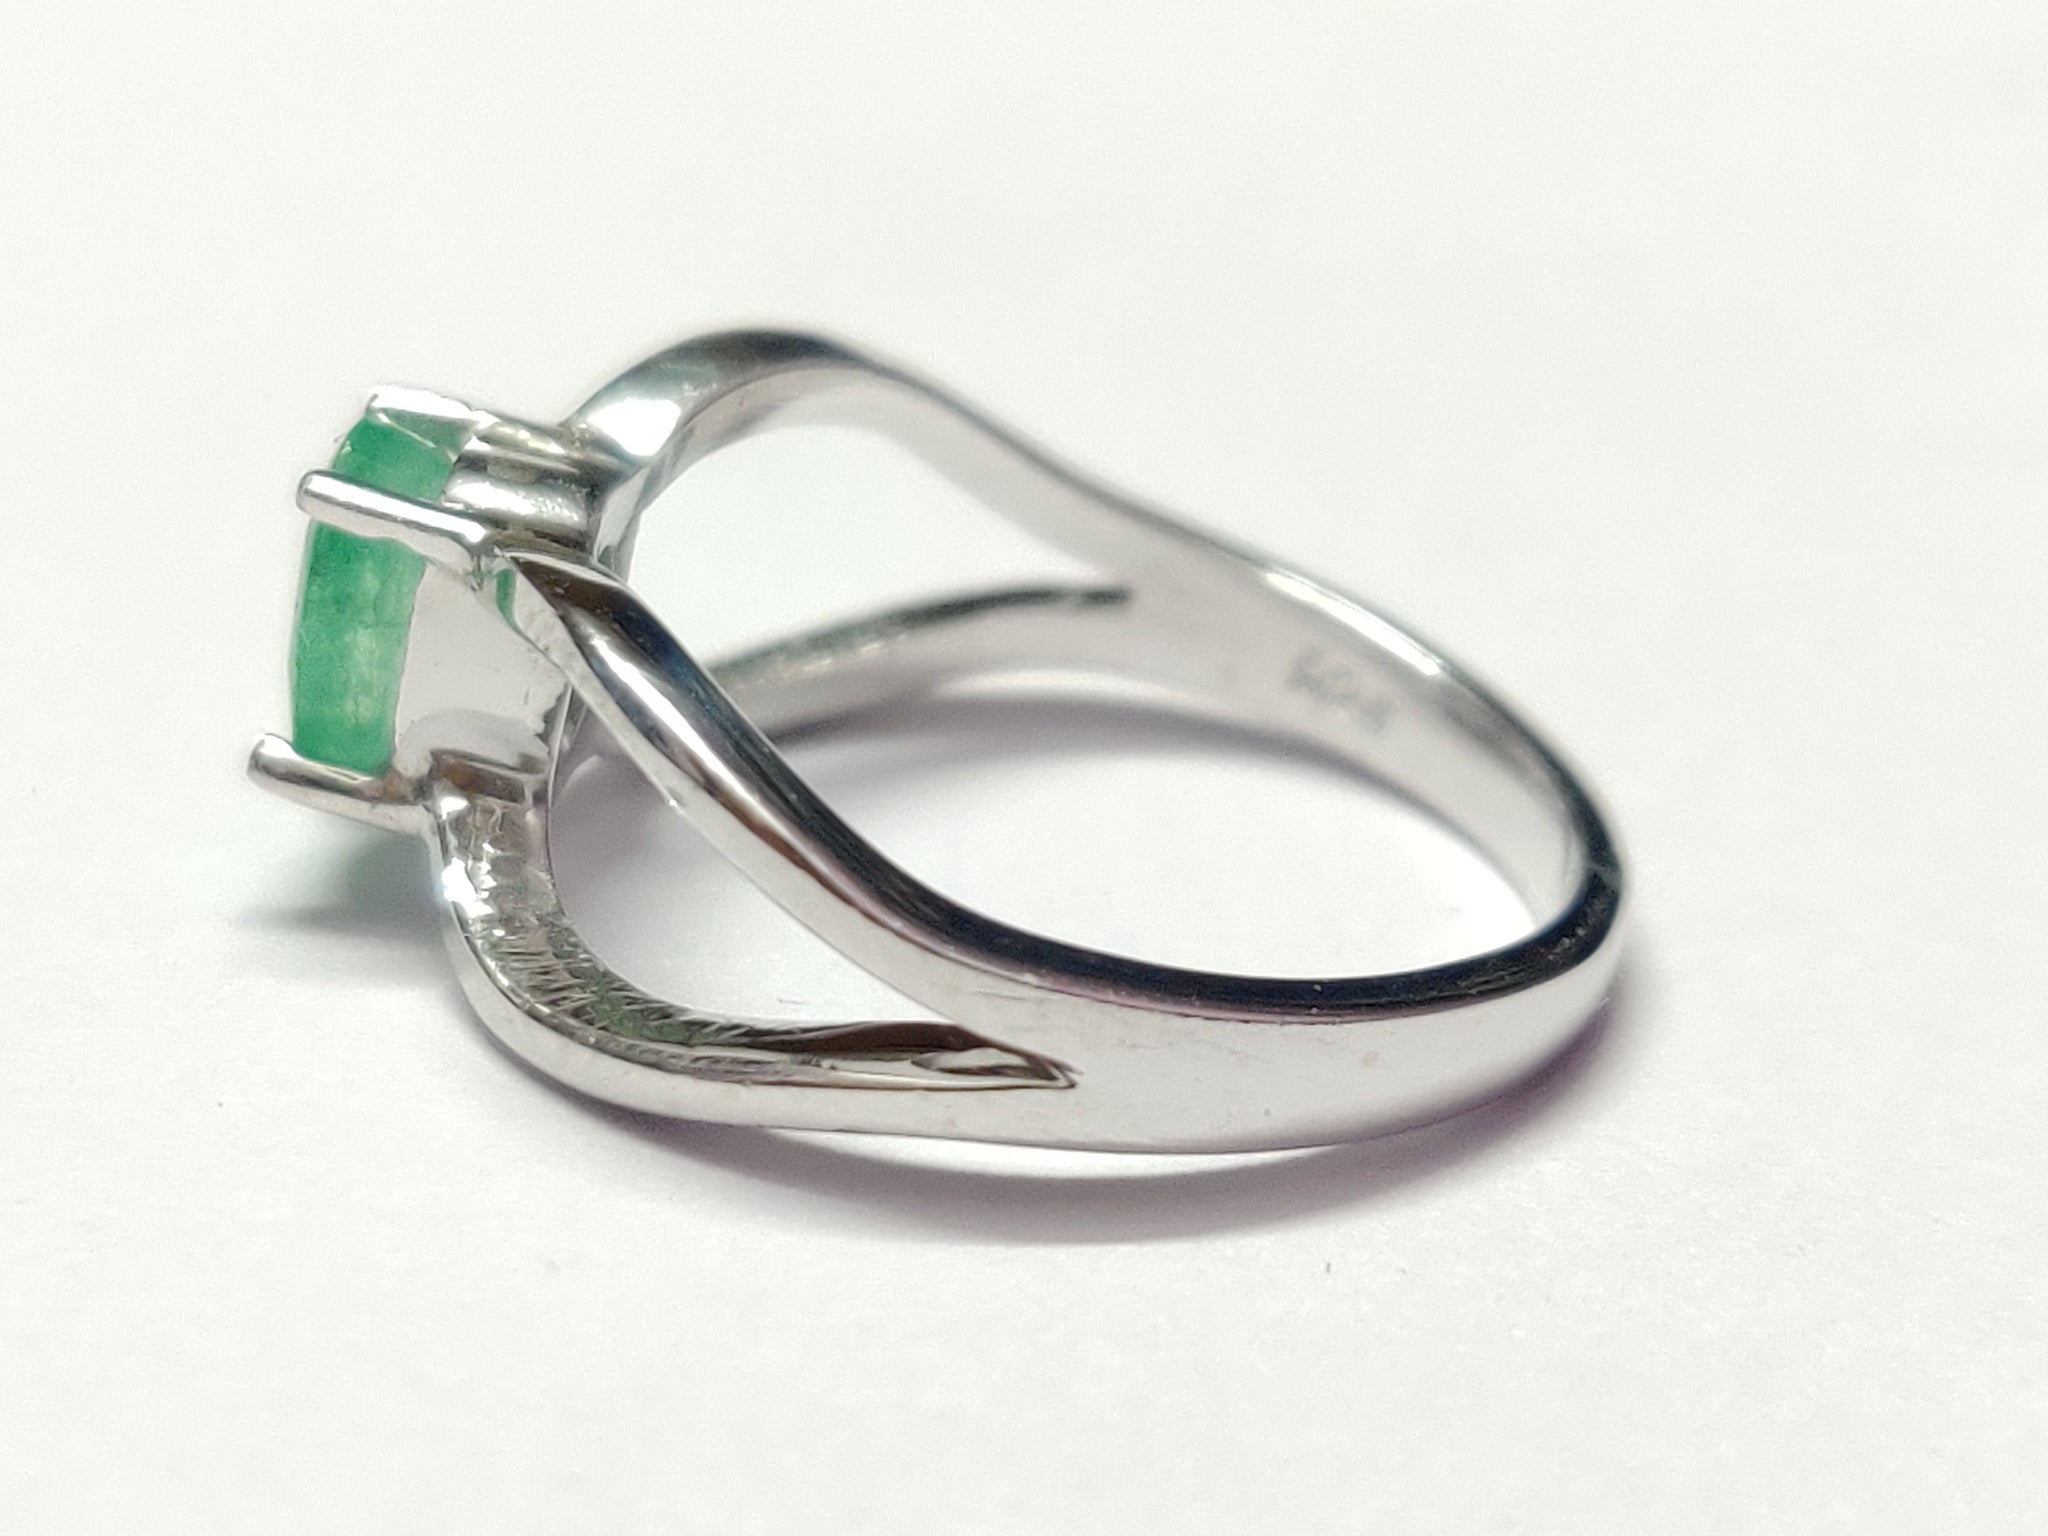 Tiny Emerald Band Sterling Silver Emerald Ring Daily Wear Emerald Ring 4x6 mm Oval 0.6 Ct Emerald Stacking Ring May Birthstone Ring